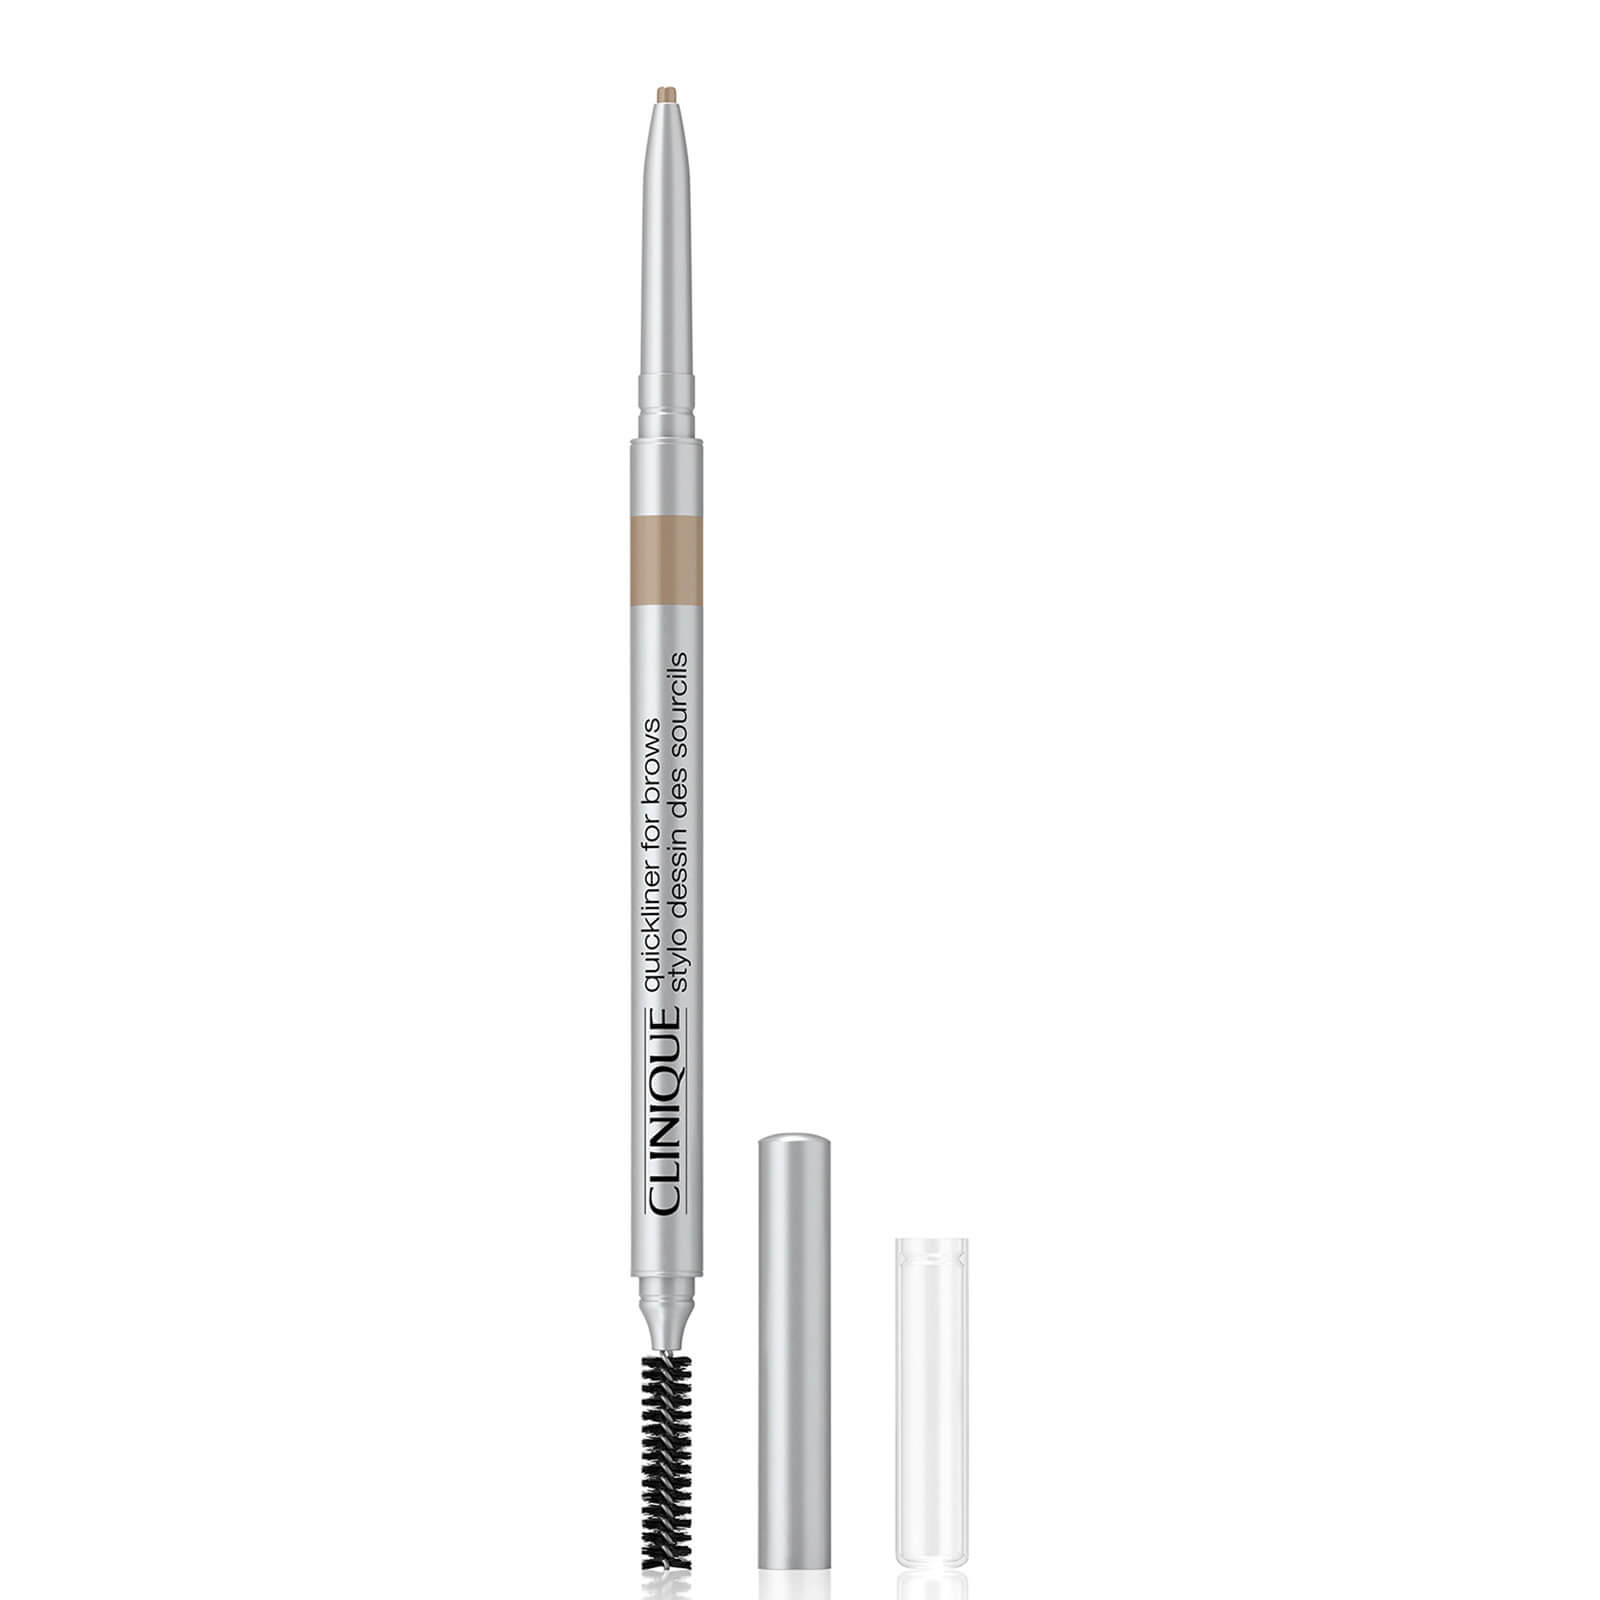 Clinique Quickliner for Brows 0.06g (Various Shades) - Sandy Blond